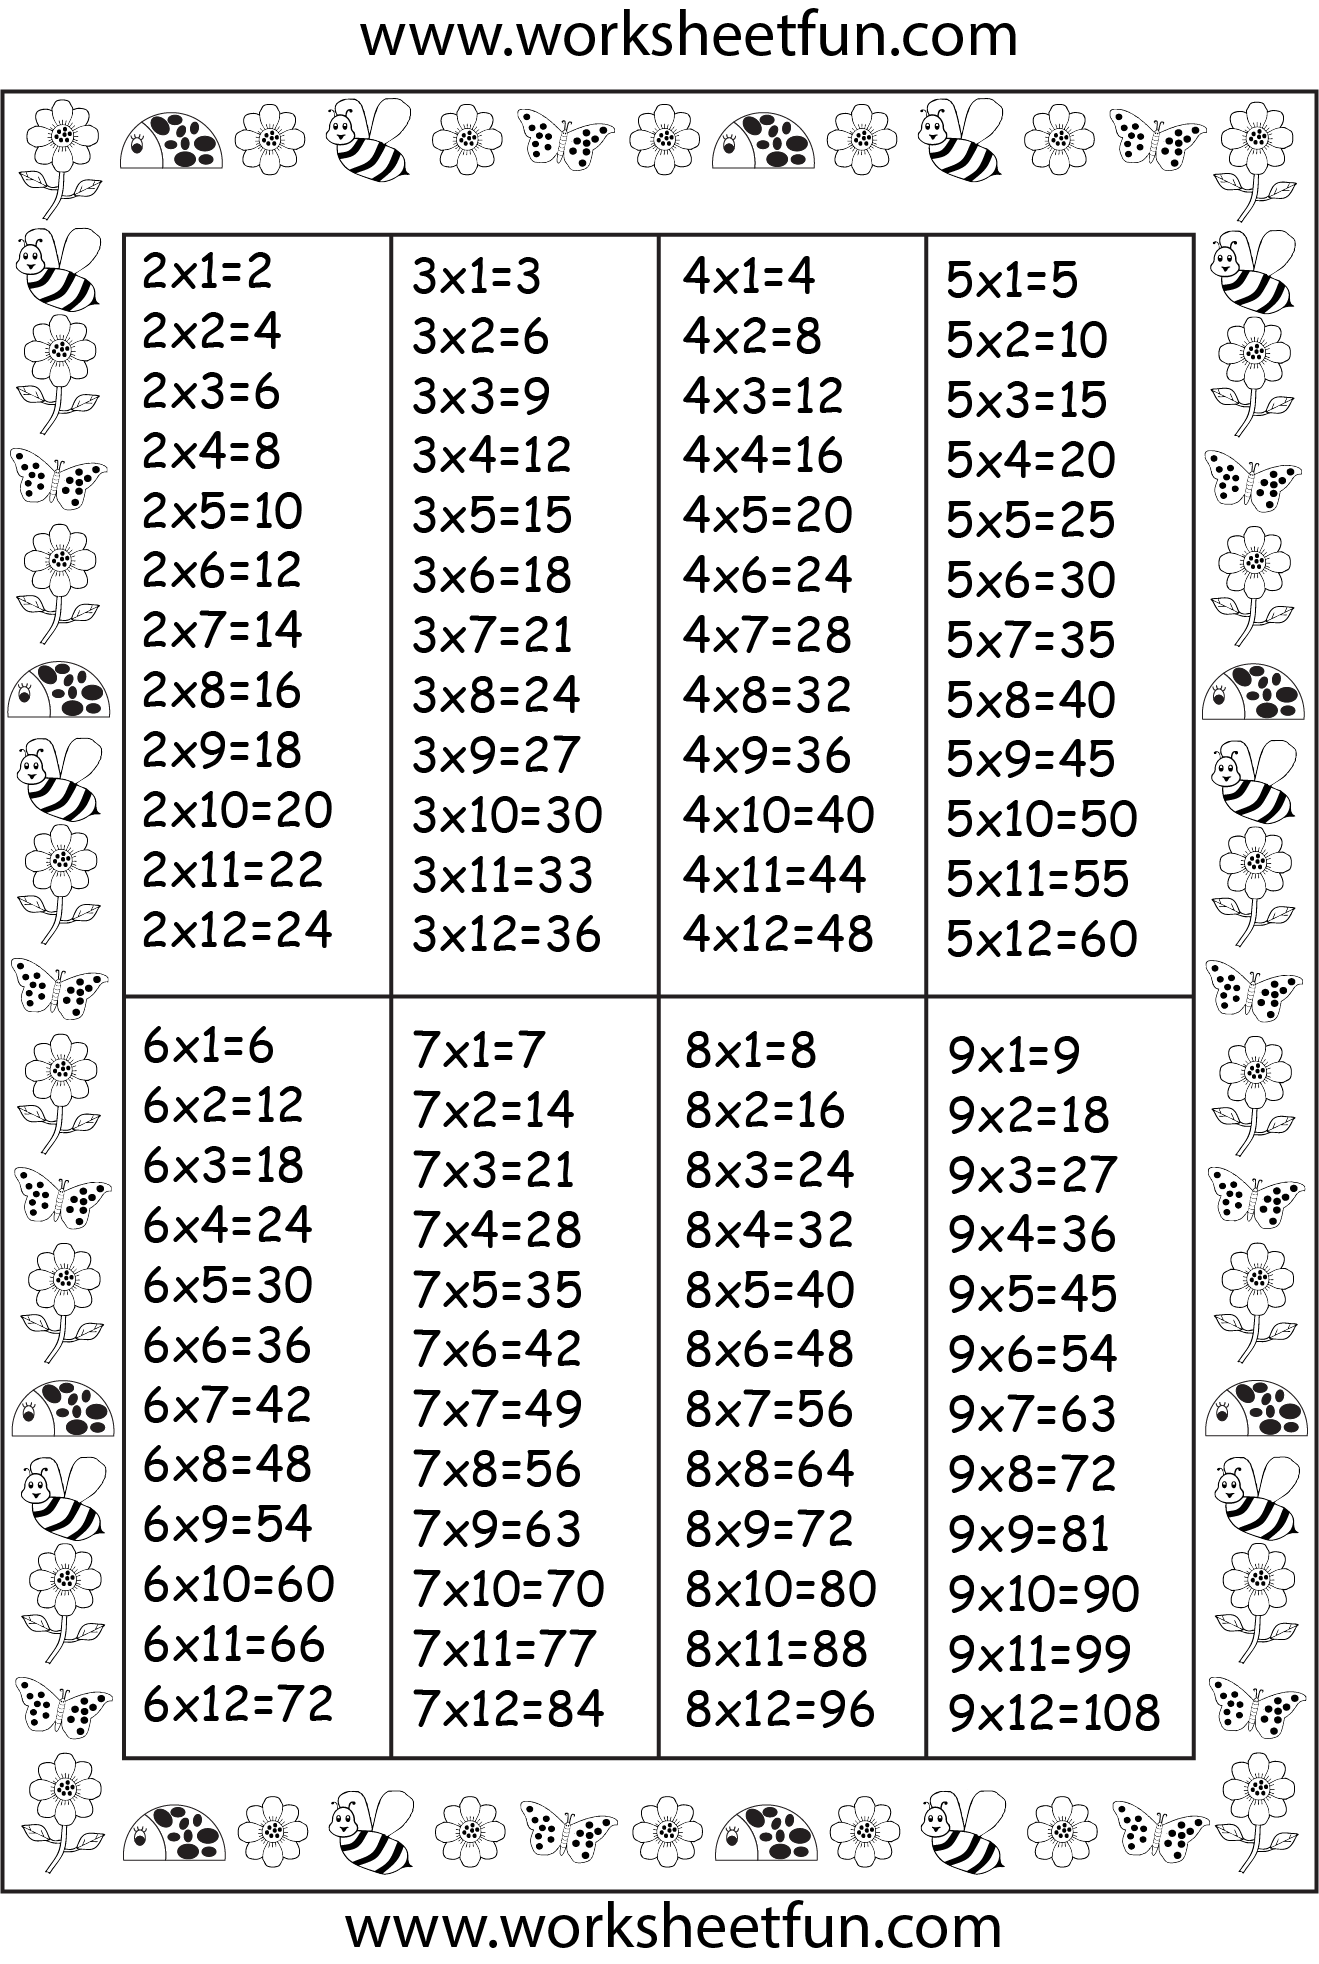 8 times table chart up to 20